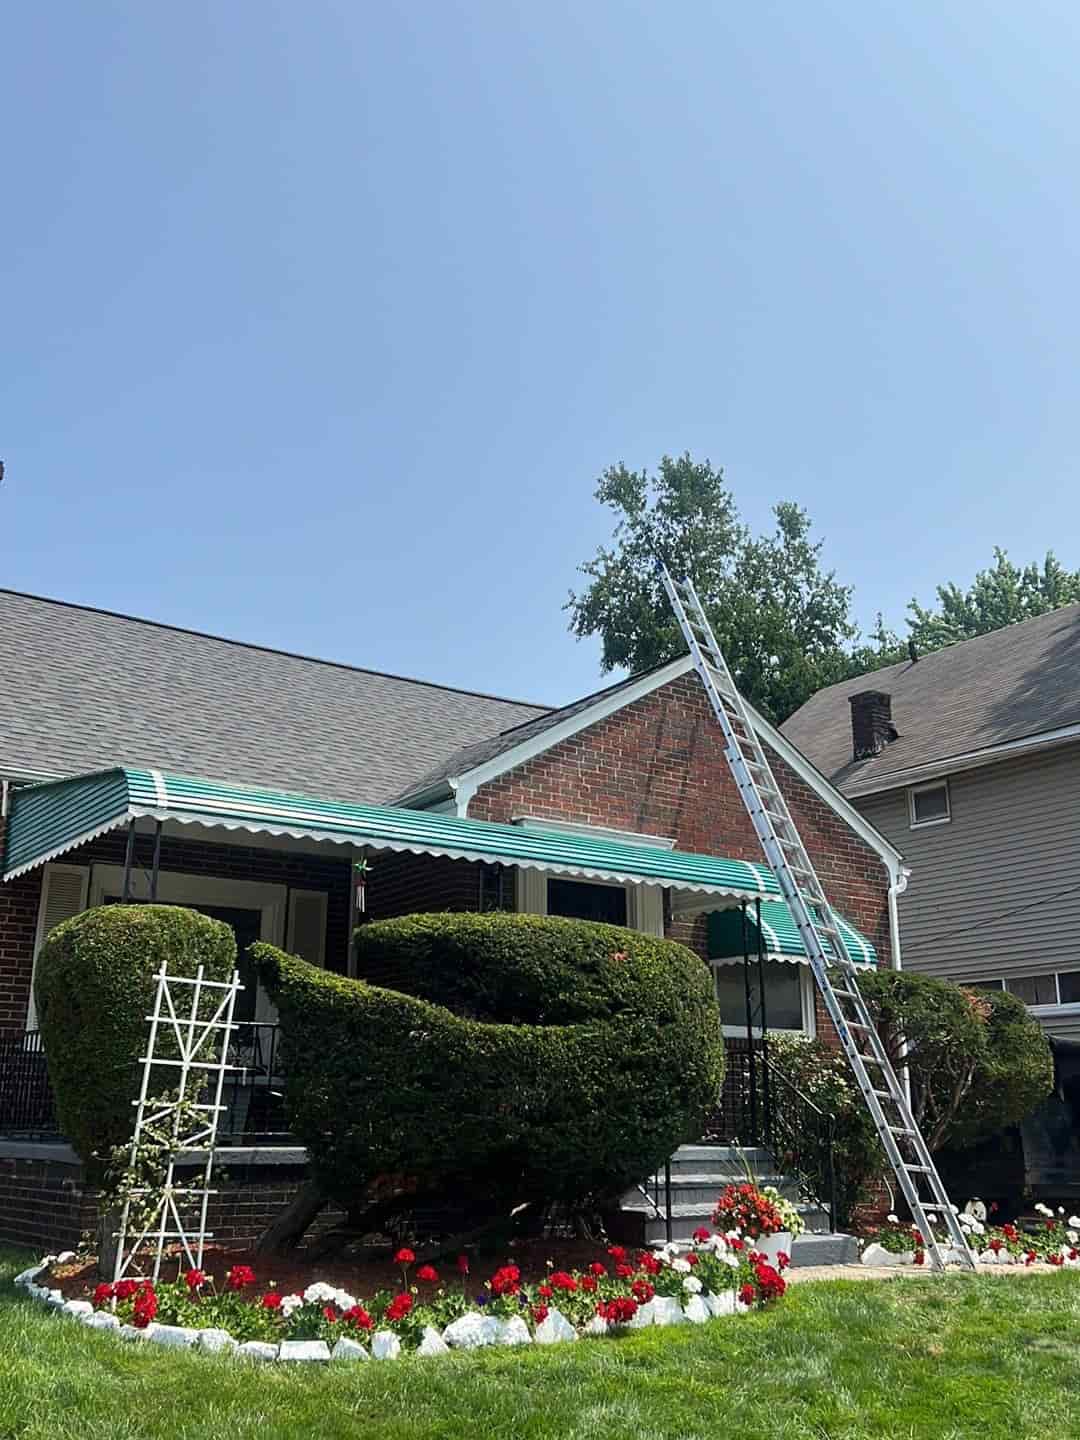 A house with a green awning and flowers, featuring a metal roof installation with a standing seam design in Ohio.